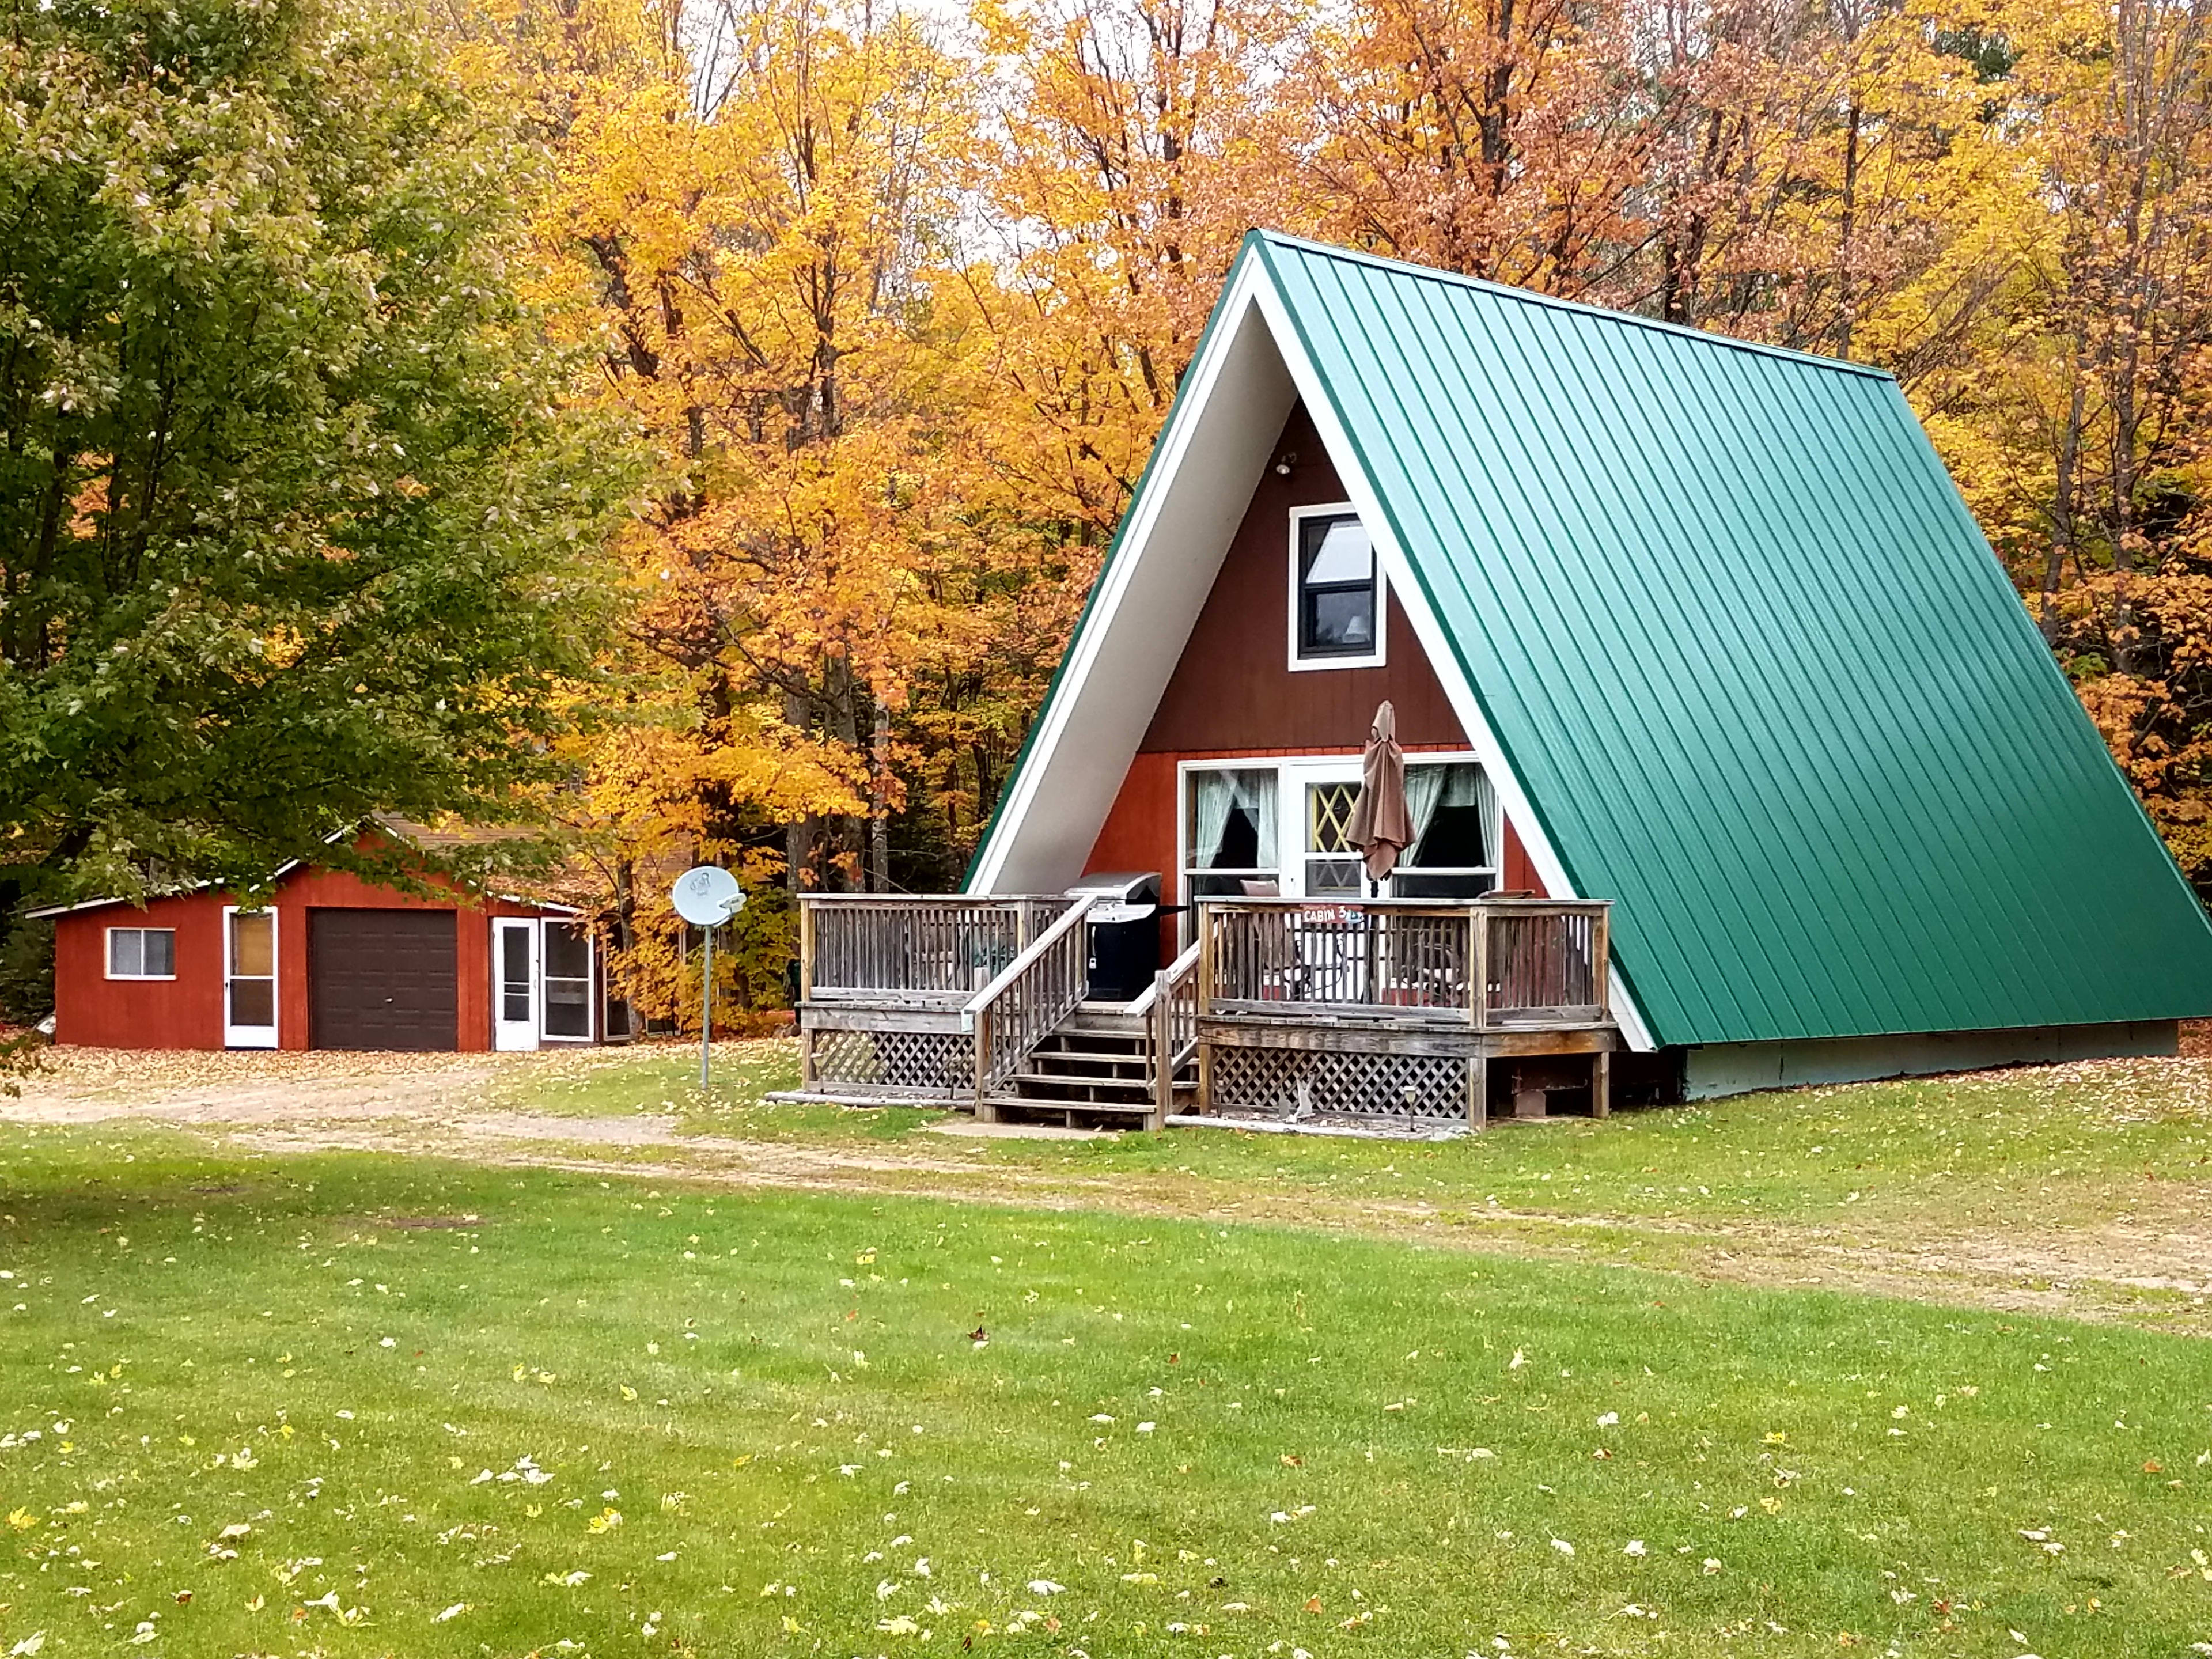 We have a cabin on site for rent. Camp site is adjacent on the other side of shed to the left. 